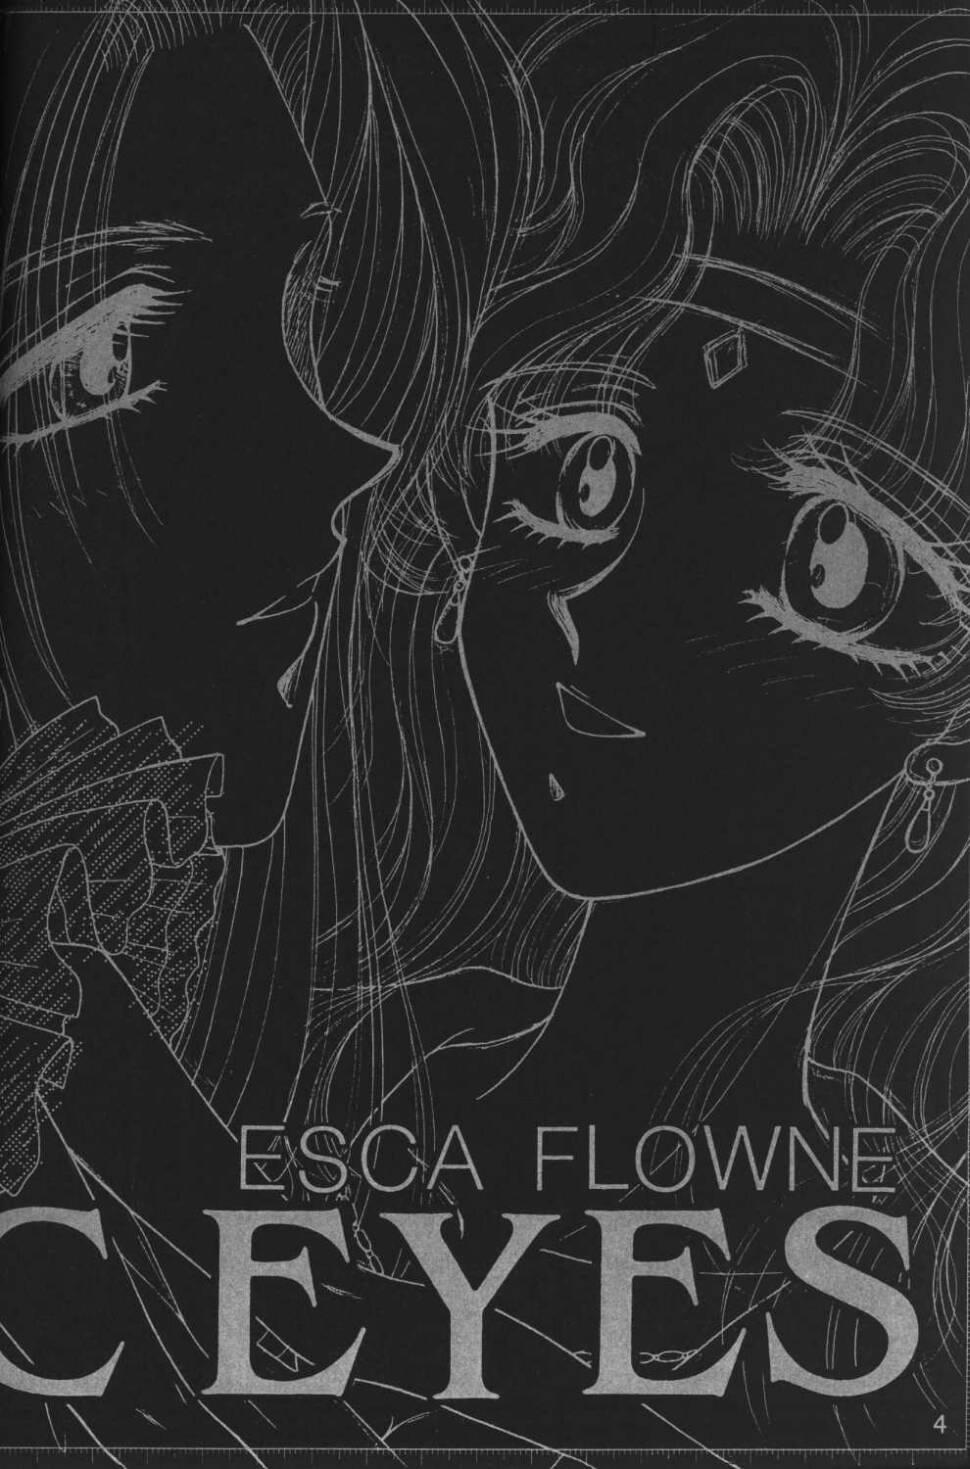 Hard Core Sex MYSTIC EYES - The vision of escaflowne Threesome - Page 3